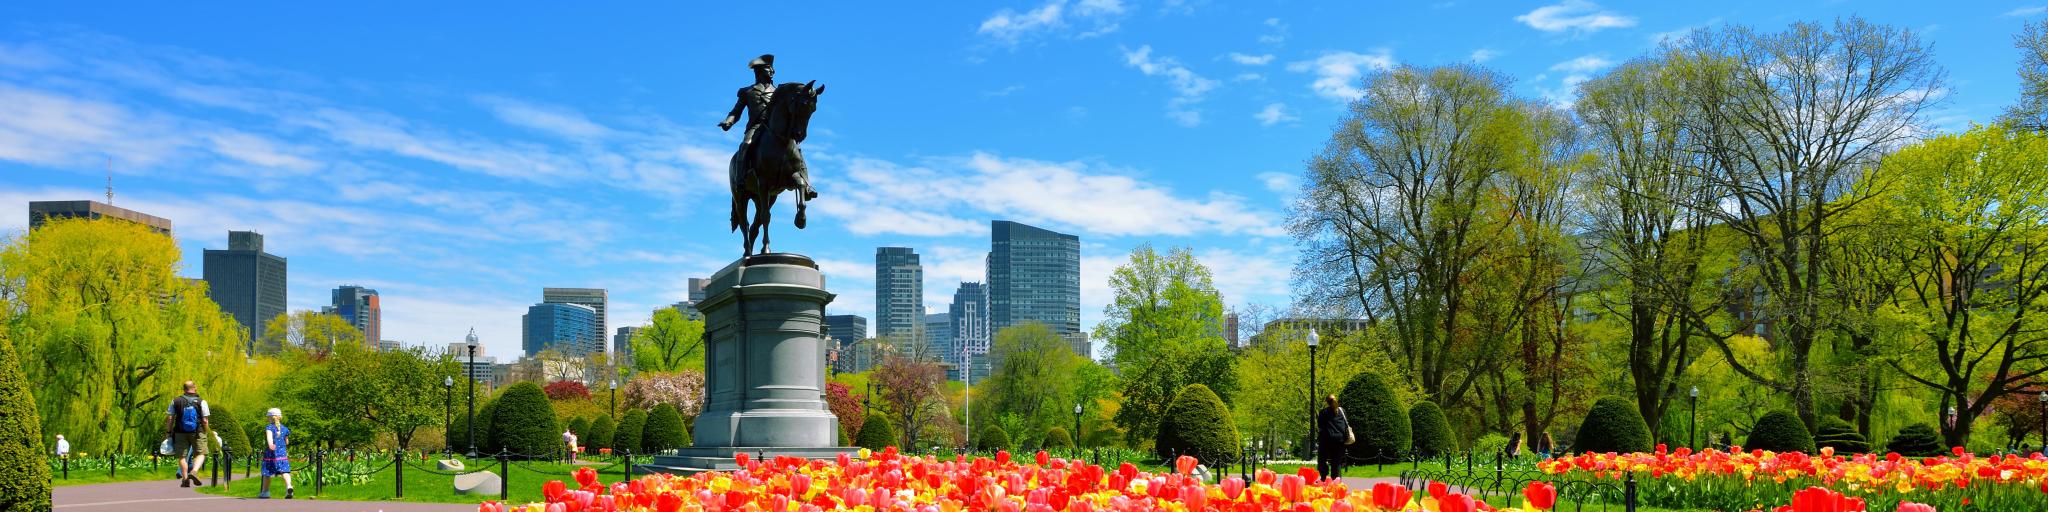 Boston Public Garden with George Washington statue in the background with blue skies. There are tulips in the foreground.